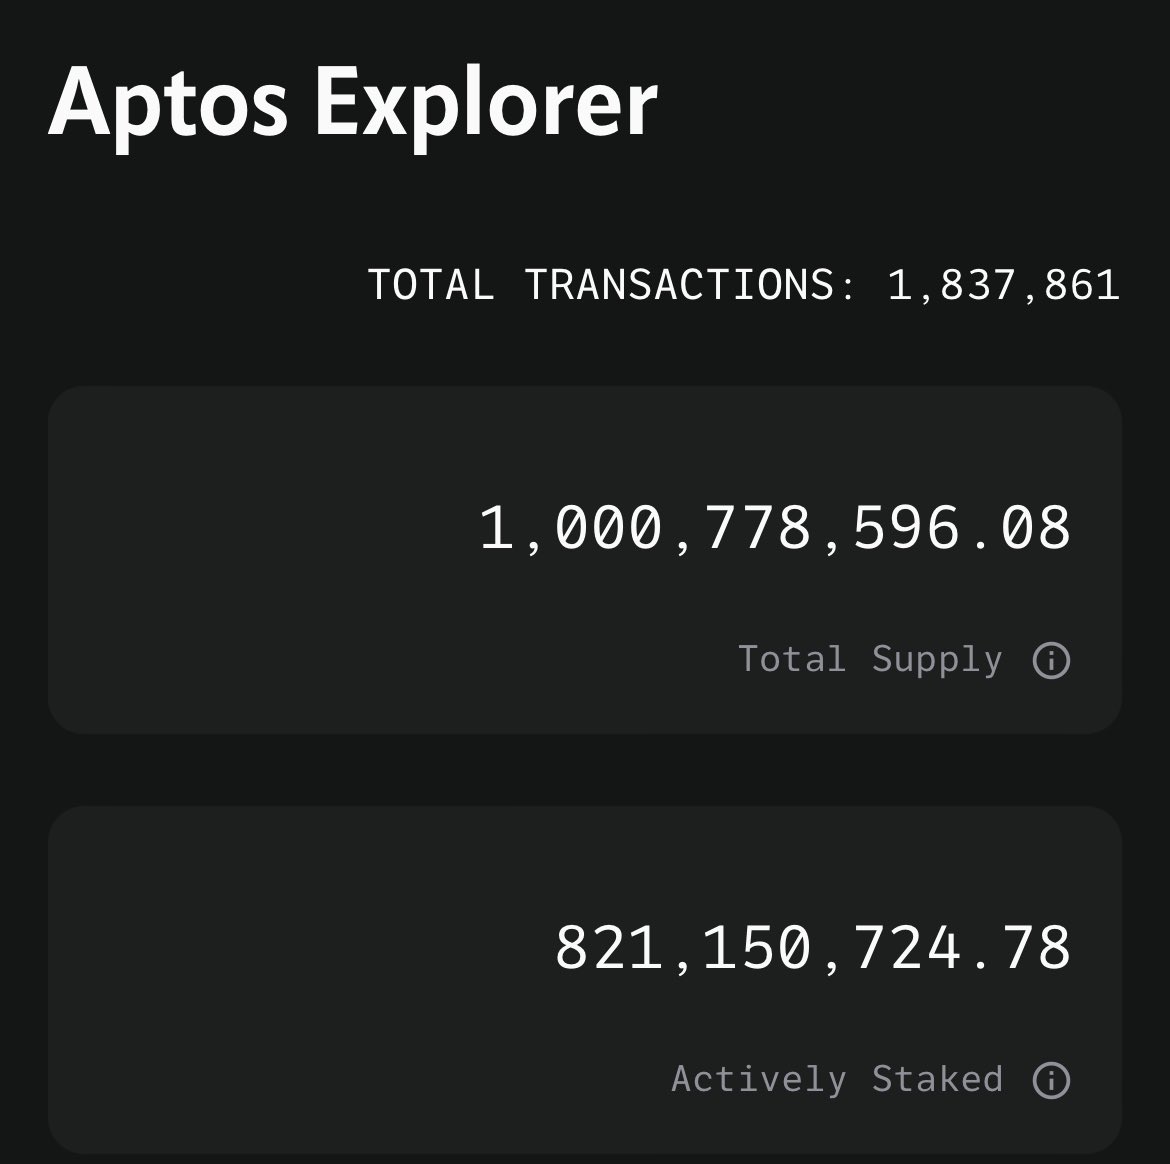 No way over 80% of Aptos tokens are staked right? Investors and team should be vesting? Unless this is one of those vest but you can stake things.